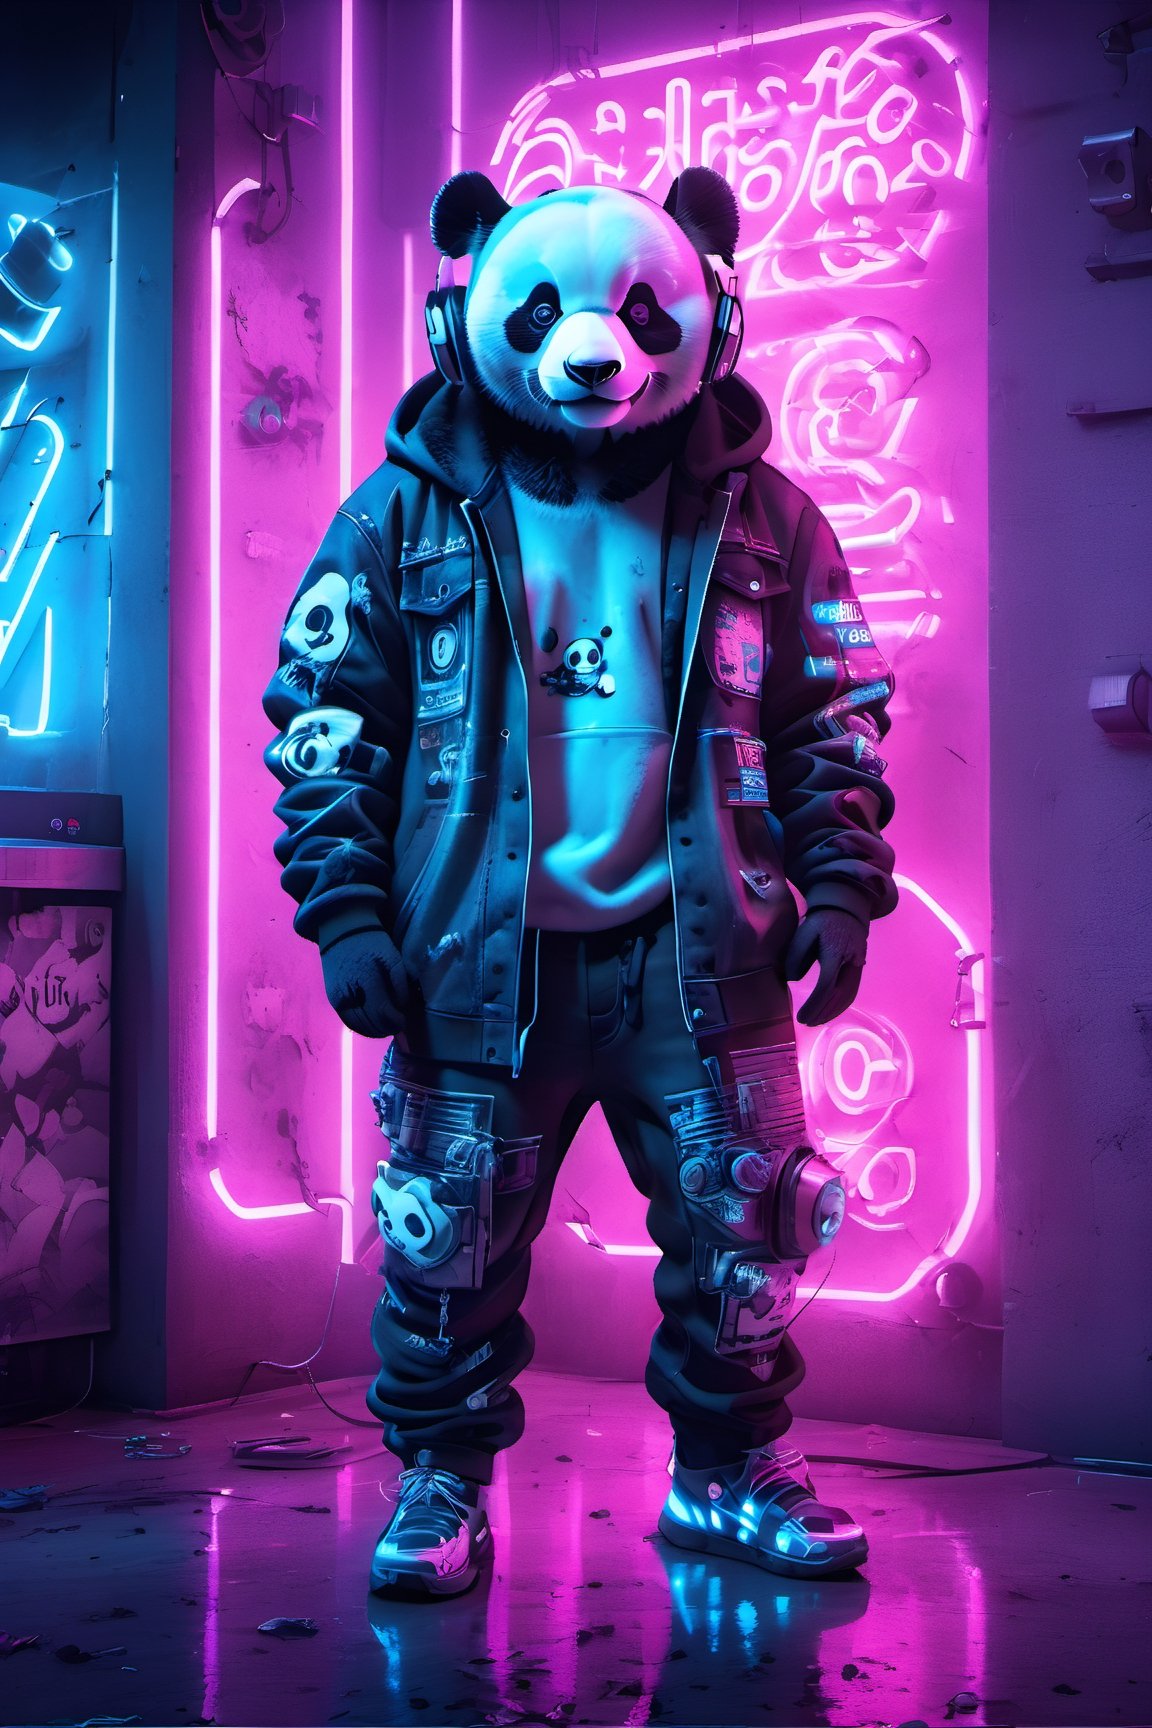 cyberpunk style,neon photography style, a very cool panda wearing a jeans jacket and headphones striking a pose, full body image, perfect detail, HDR, depth in field, awsome background, Hi-fi, cool street art